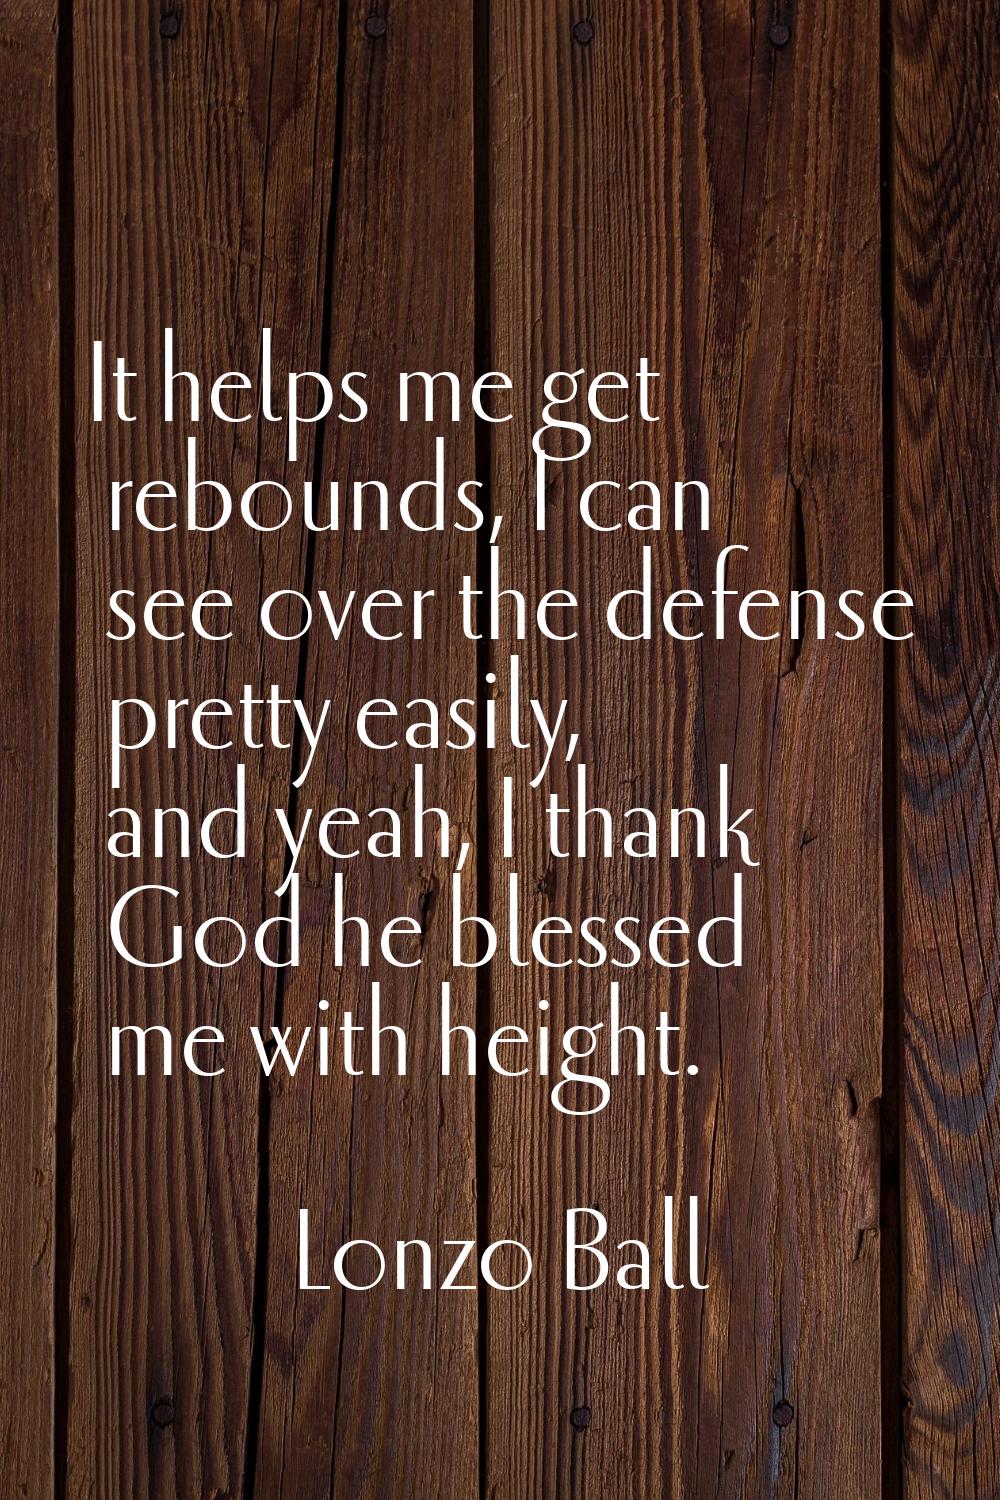 It helps me get rebounds, I can see over the defense pretty easily, and yeah, I thank God he blesse